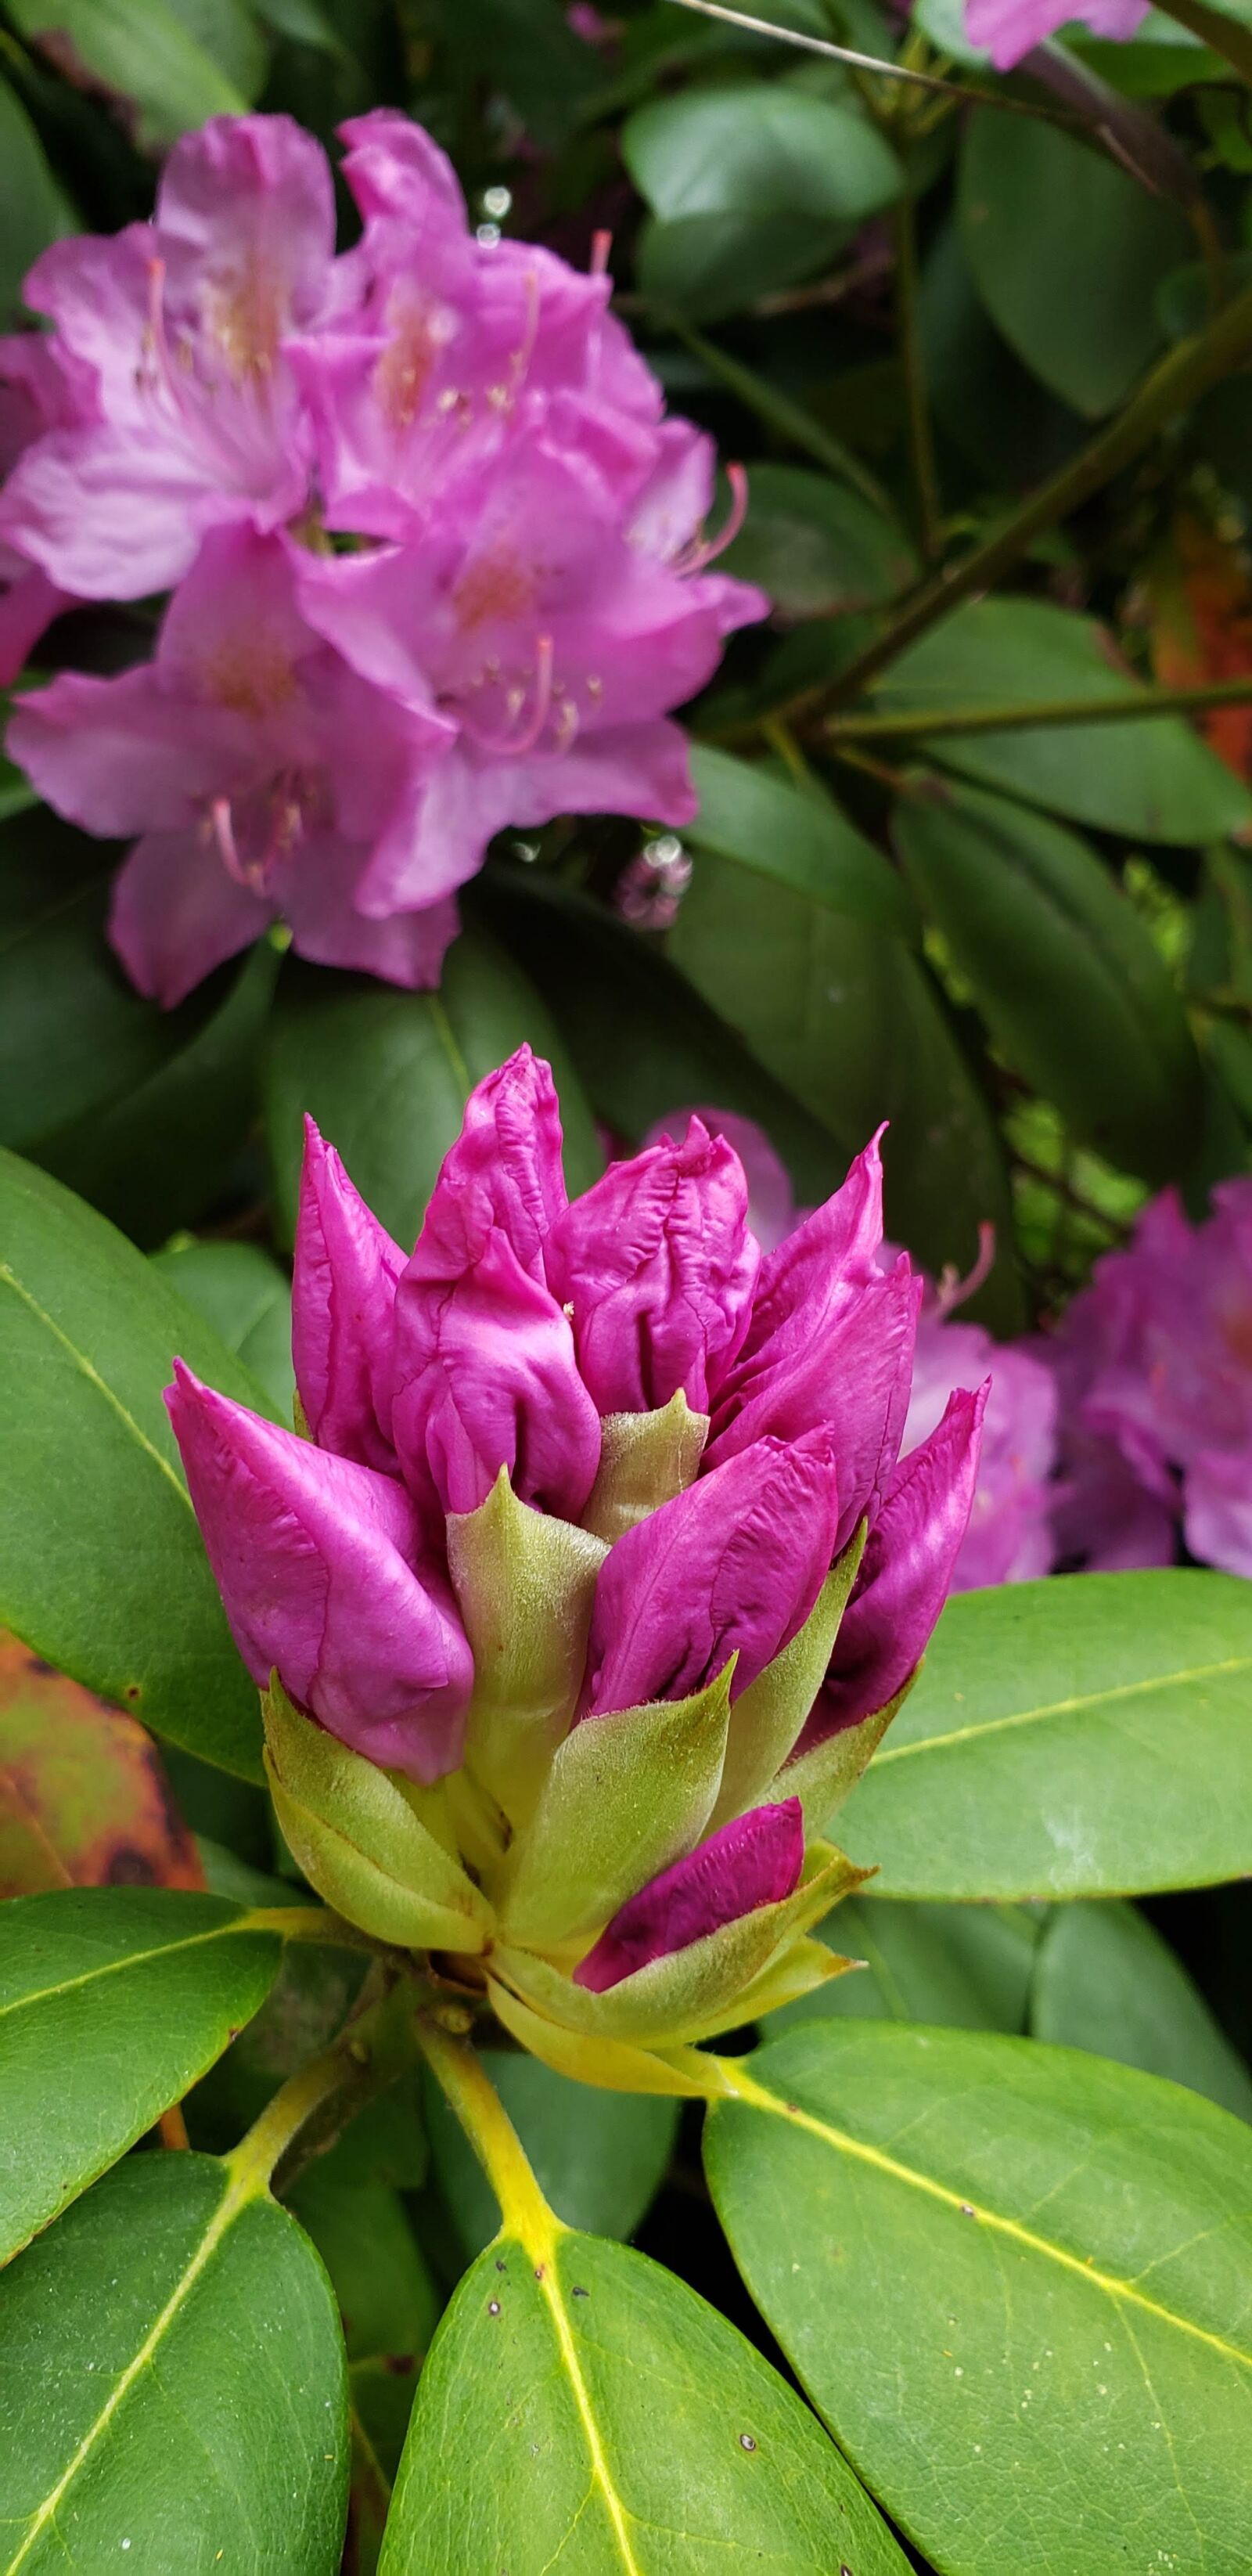 Samsung Galaxy S9 sample photo. Rhododendron buds and flowers photography